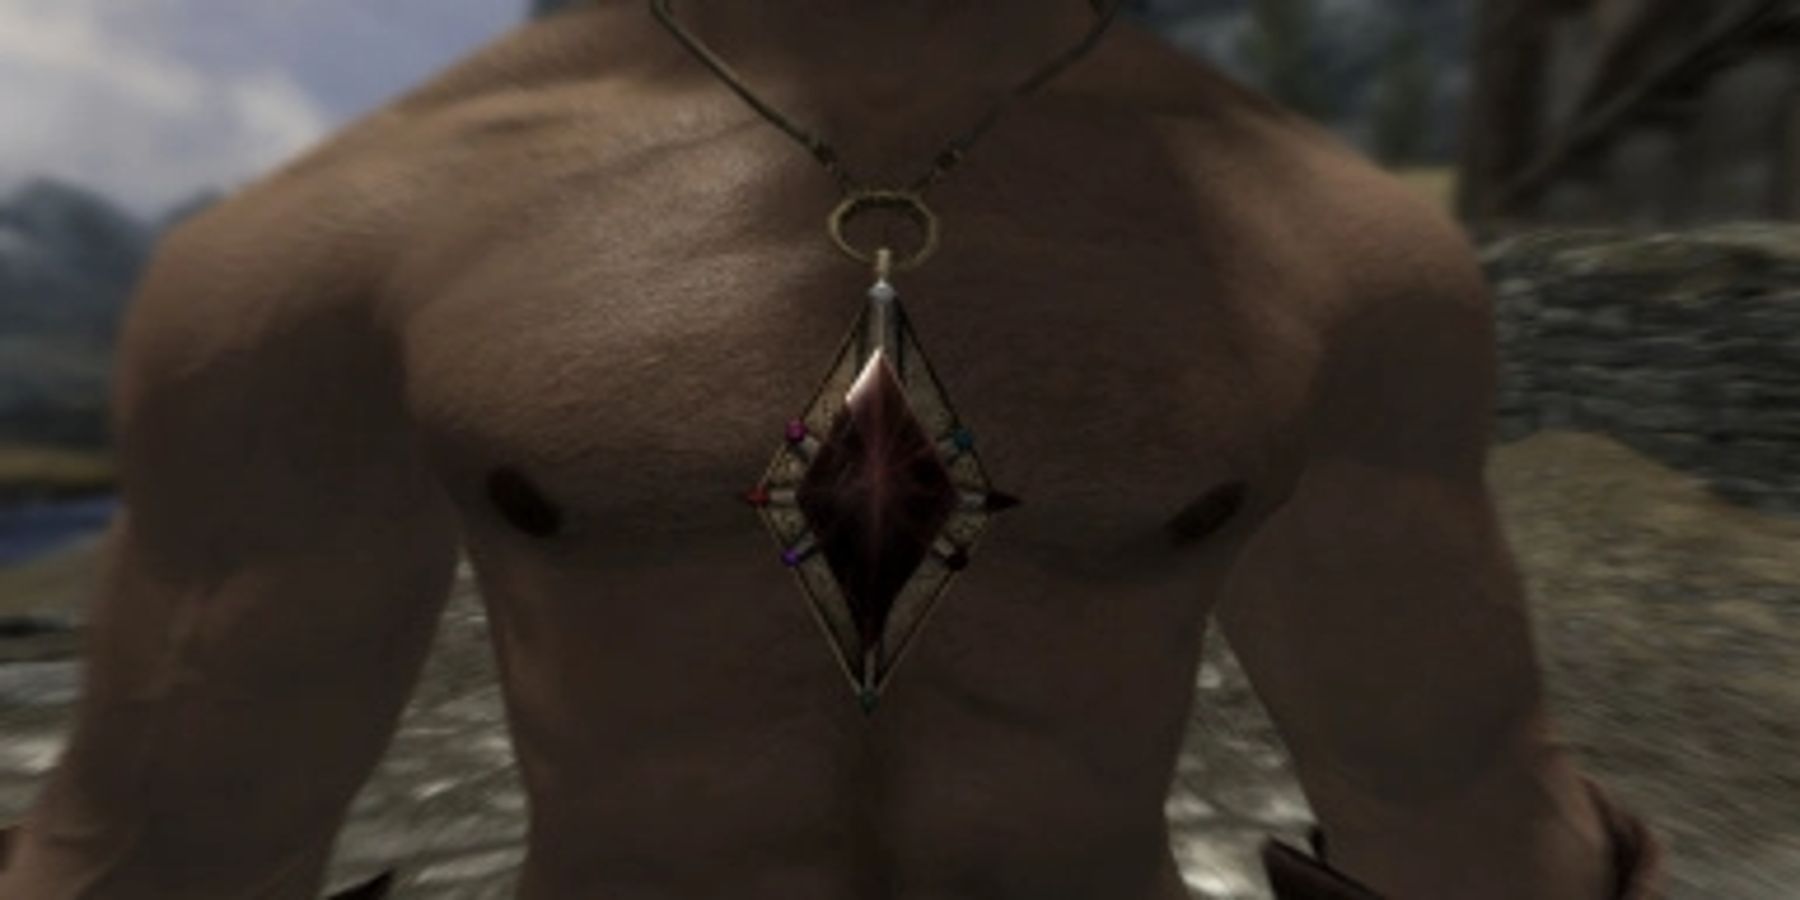 Skyrim character wearing the Amulet of Kings in a Nexus Mod